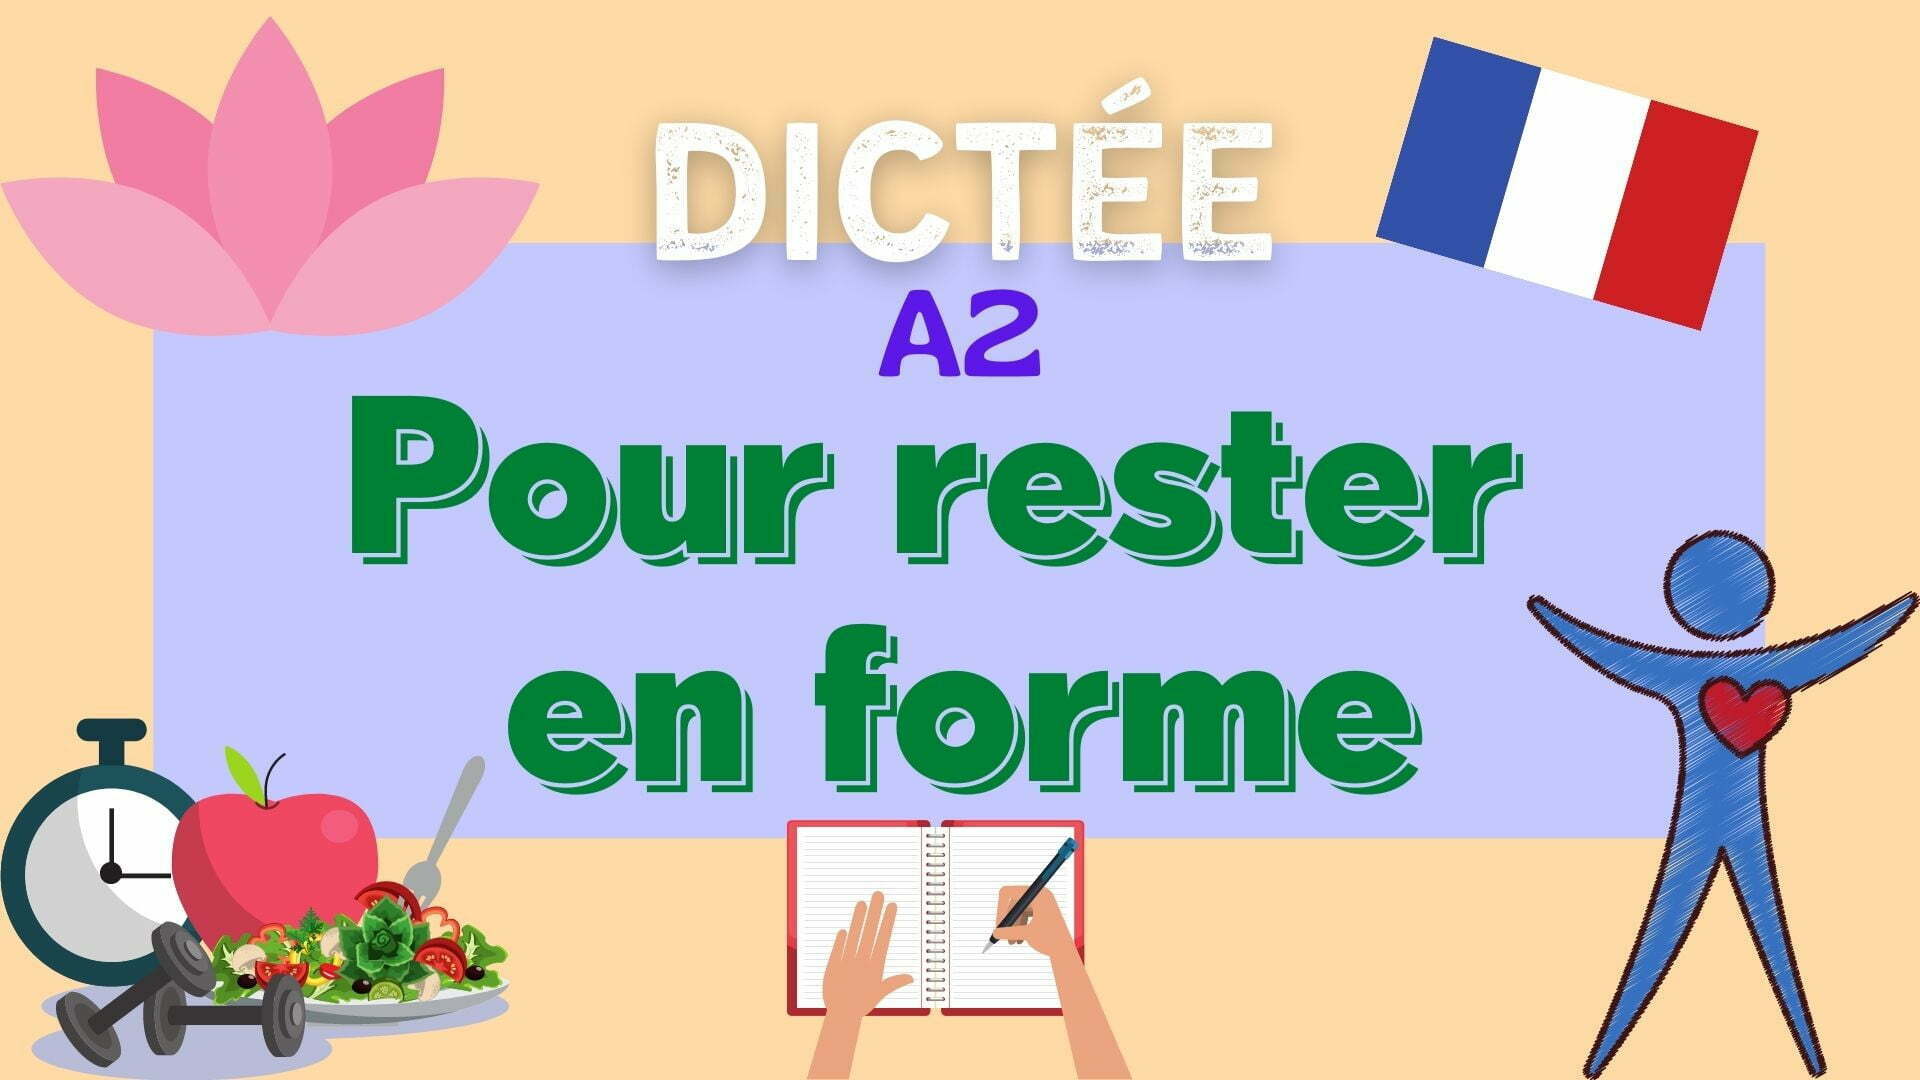 Pour rester en forme - French dictation exercise